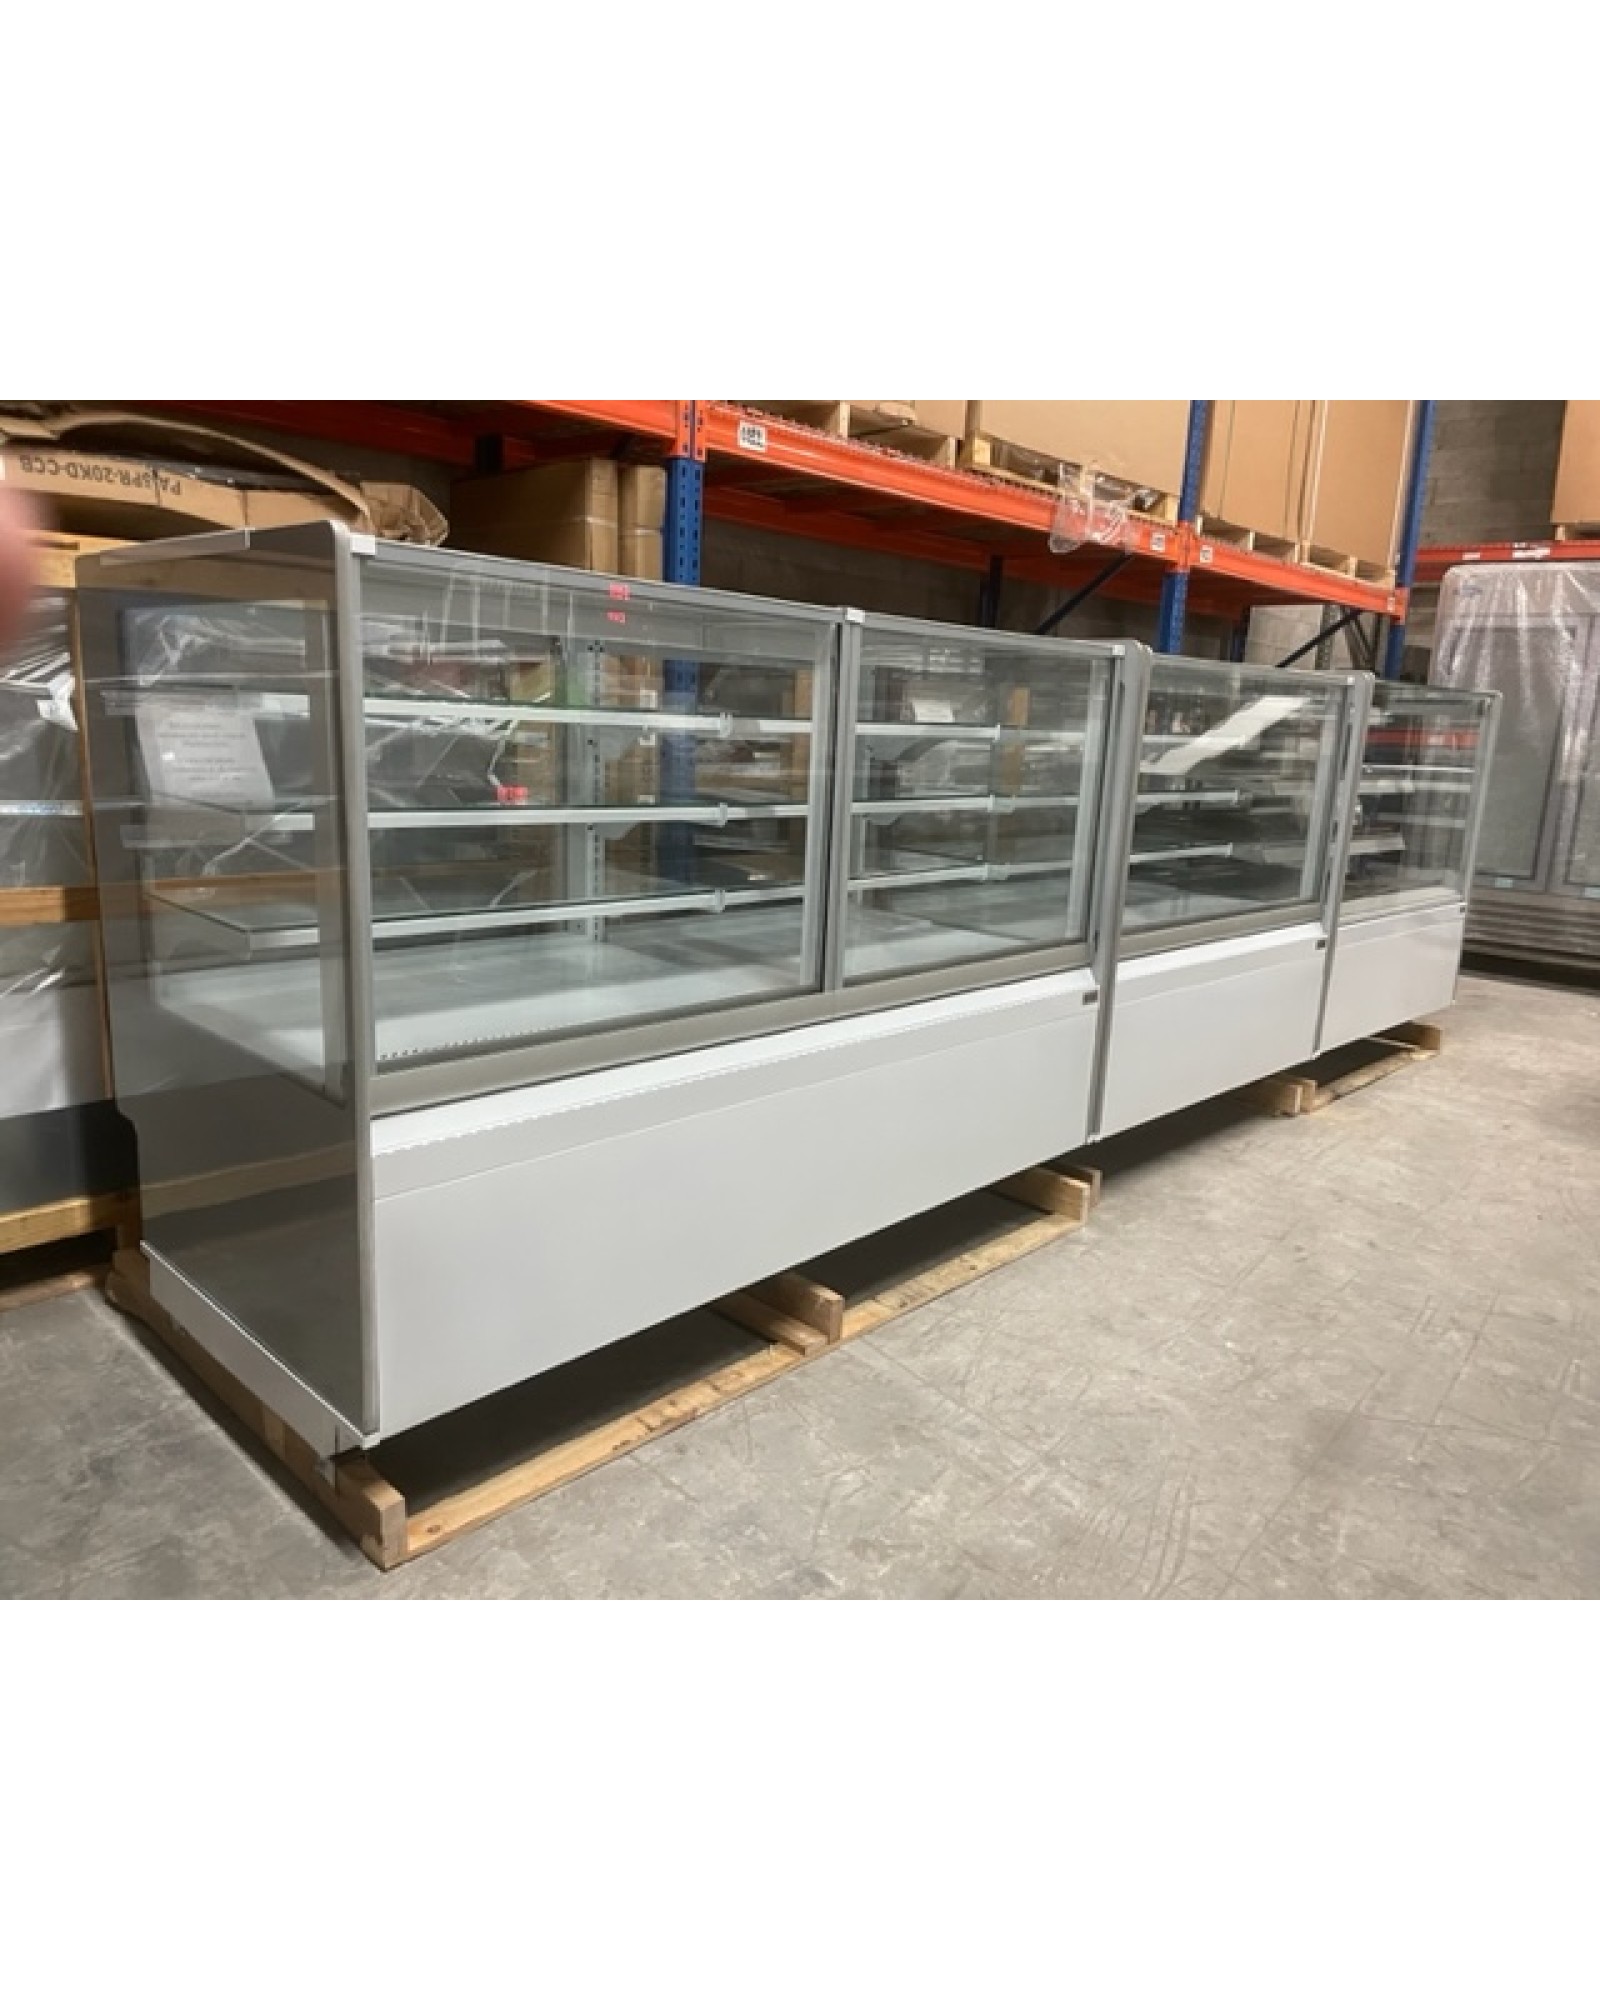 Bakery Case (Refrigerated 75")